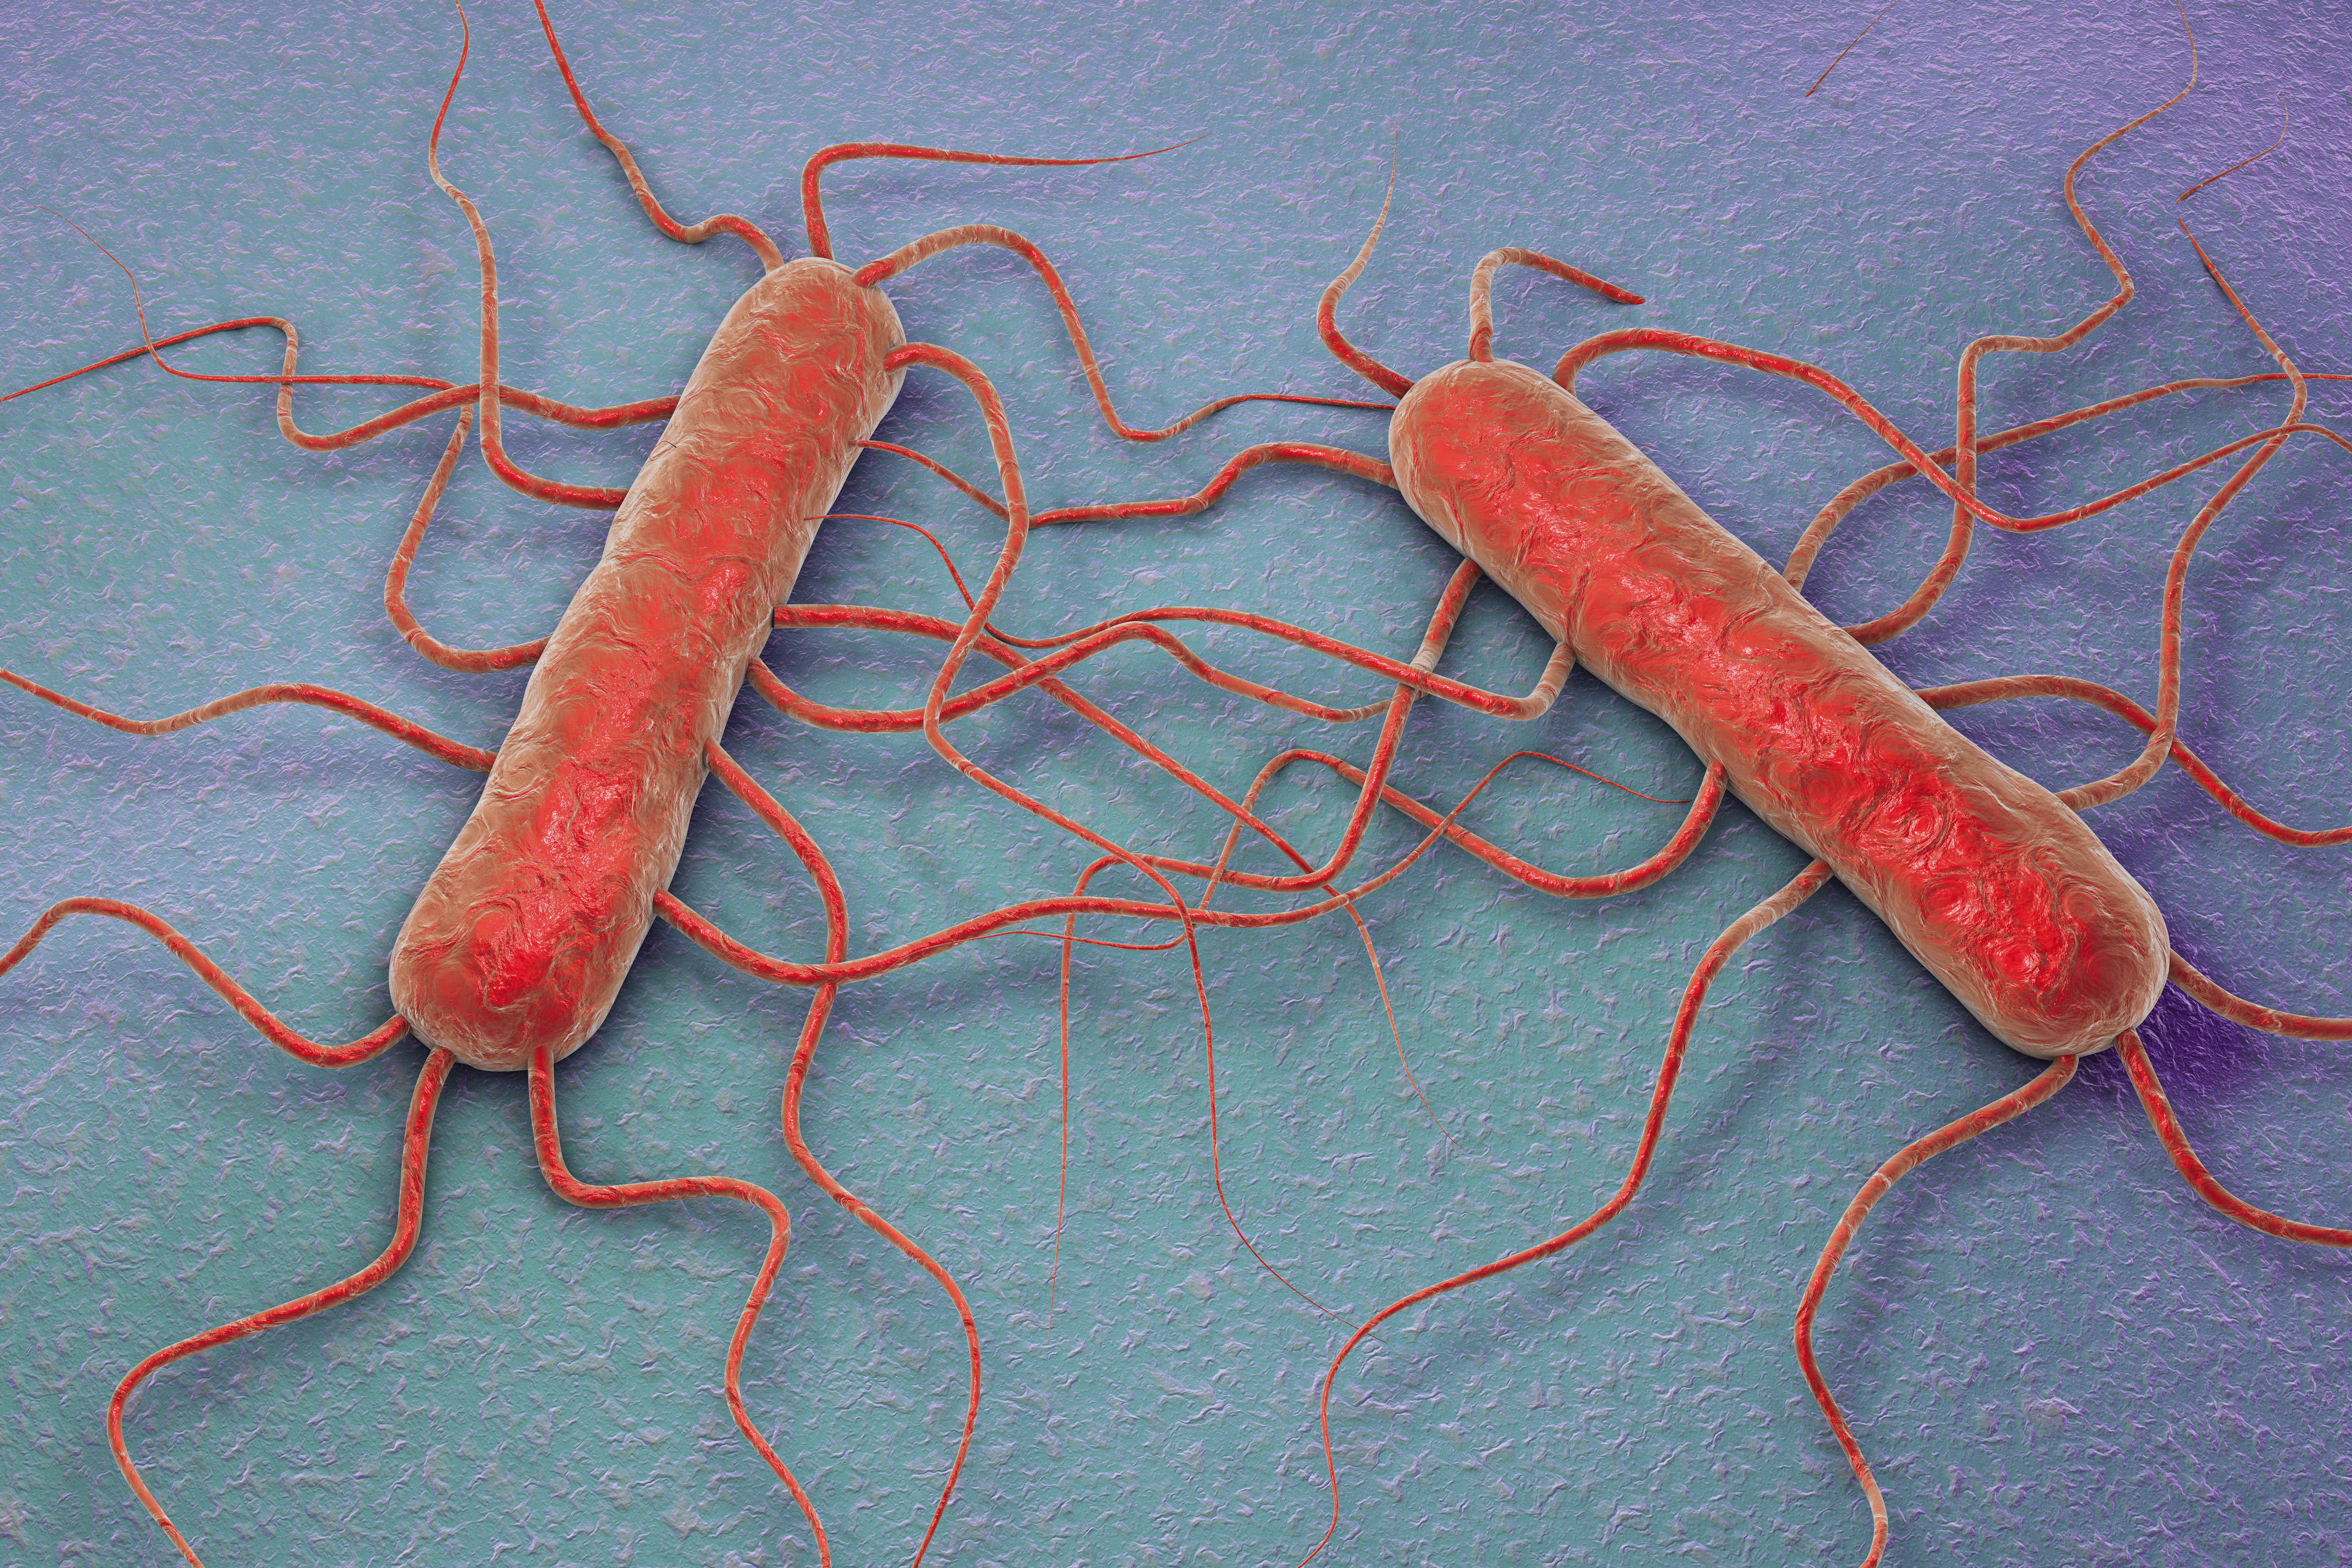 Proliferating Listeria species – are your detection methods up-to-date?